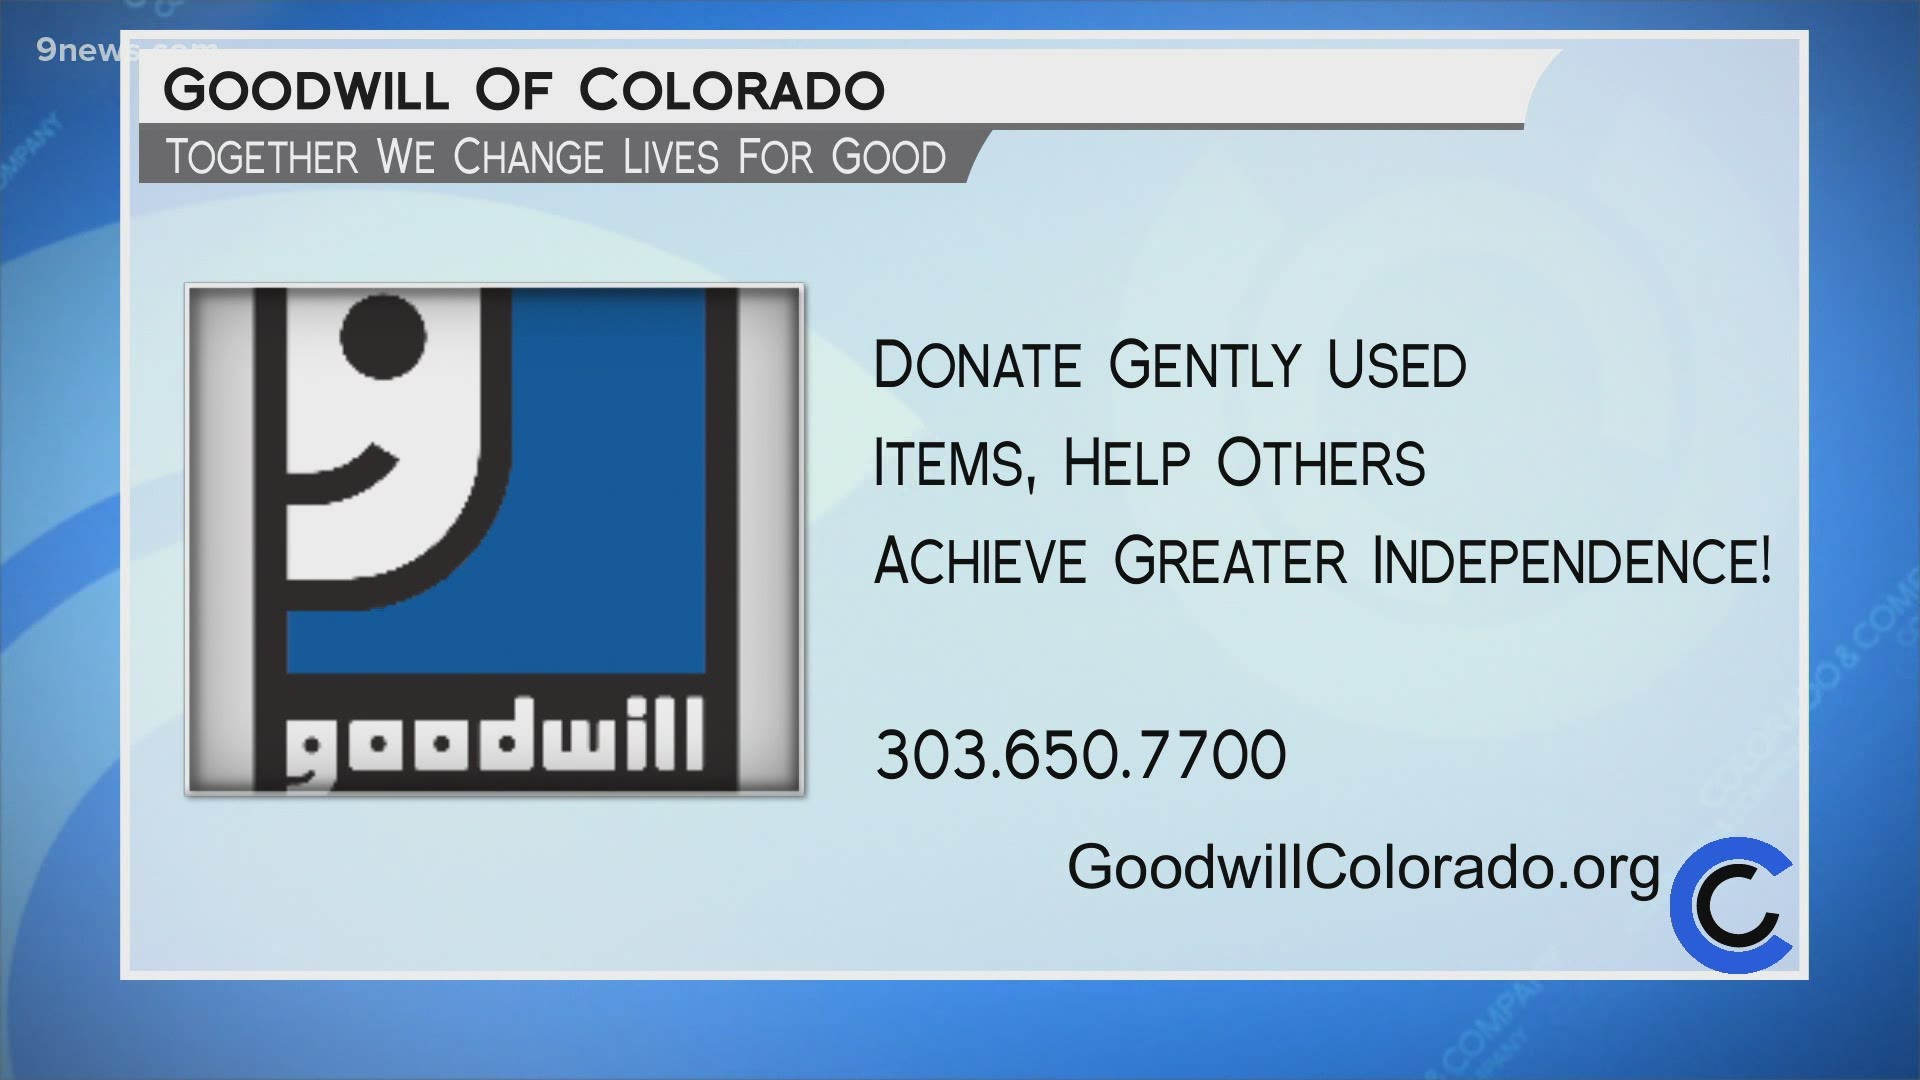 Your donations to Goodwill go to helping individuals achieve independence. Learn more and find a location near you at GoodwillColorado.org.